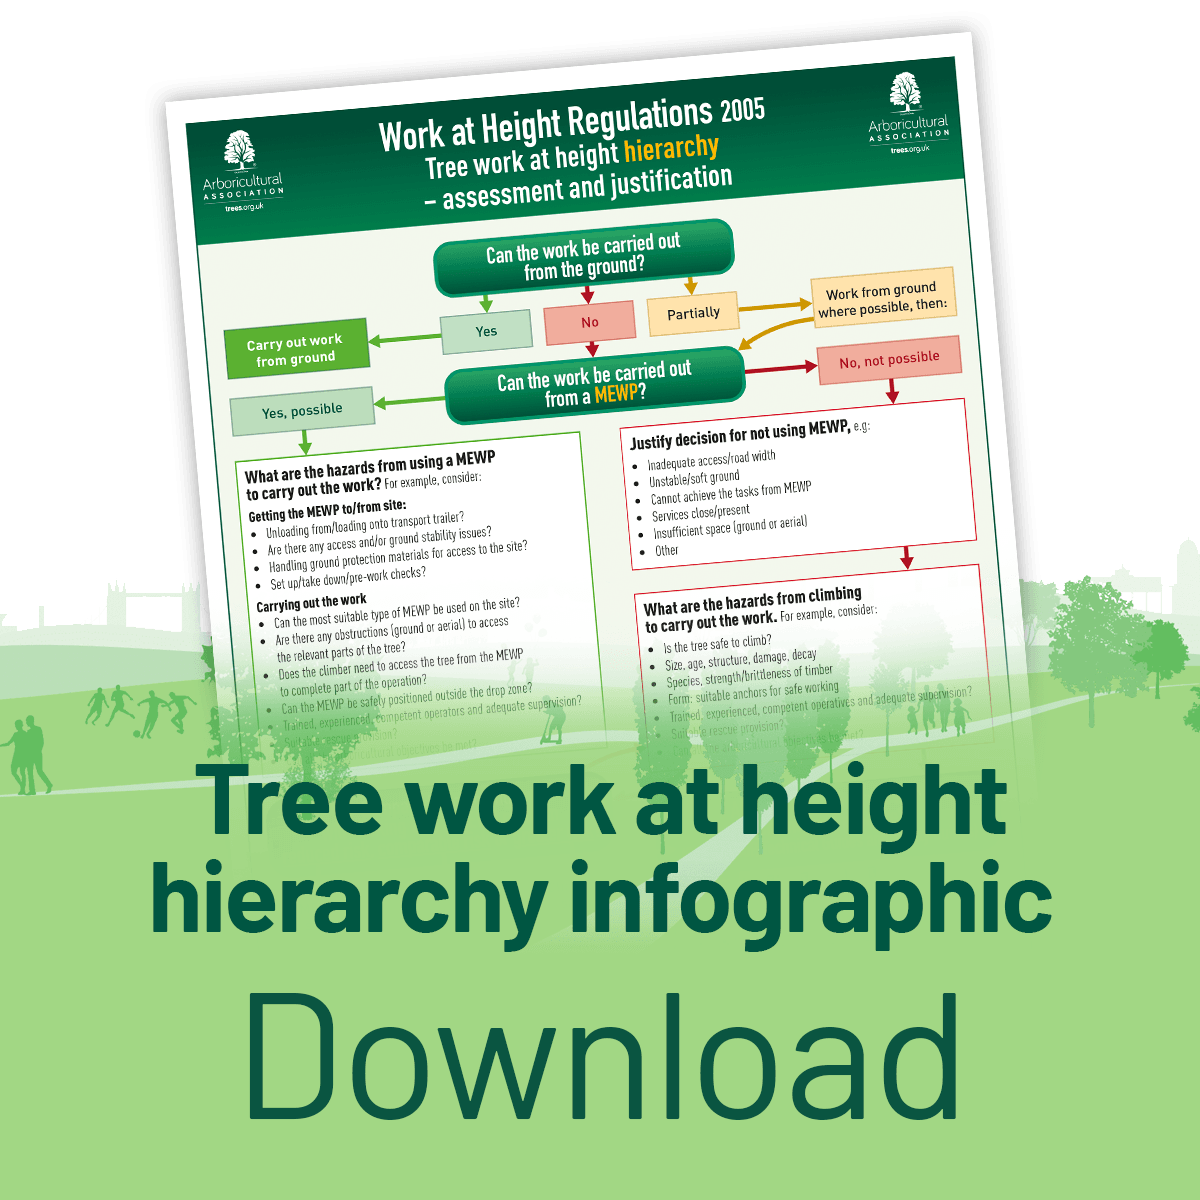 Click here to download the Tree Work at Height infographic